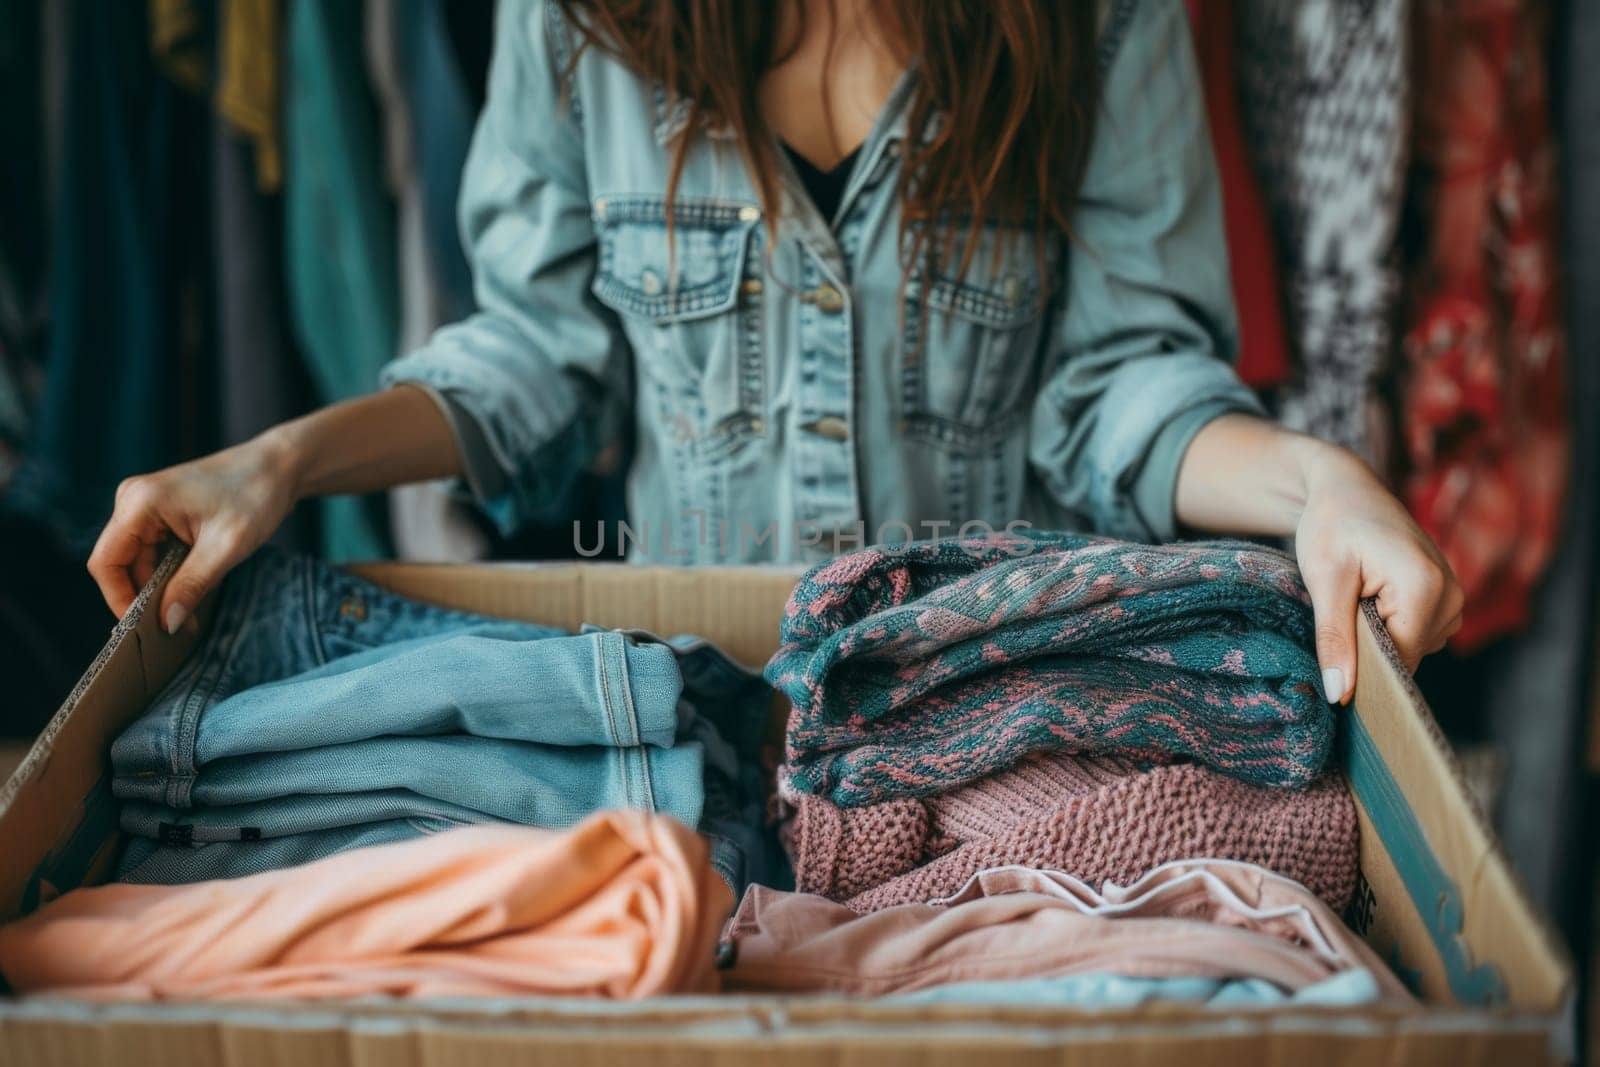 A woman is holding a box of clothes, including a pink sweater and a blue shirt. The box is full of various clothing items, and the woman is organizing them. Concept of tidiness and order